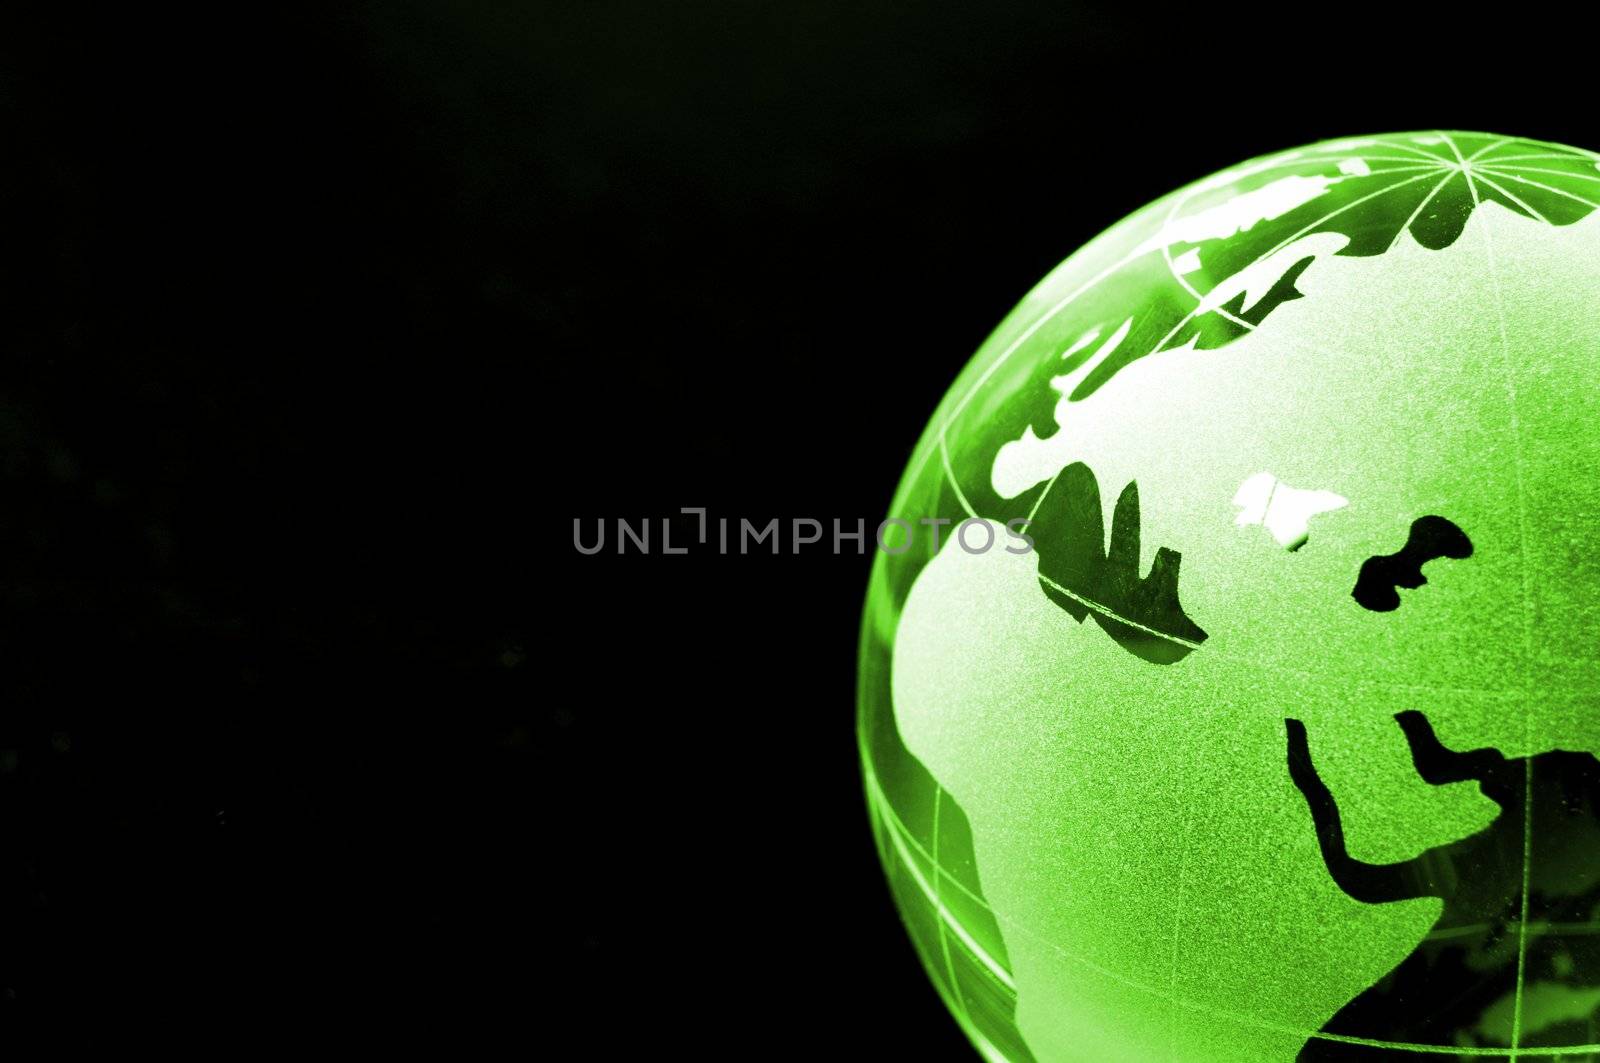 glass globe on black background showing business or environment concept with copyspace